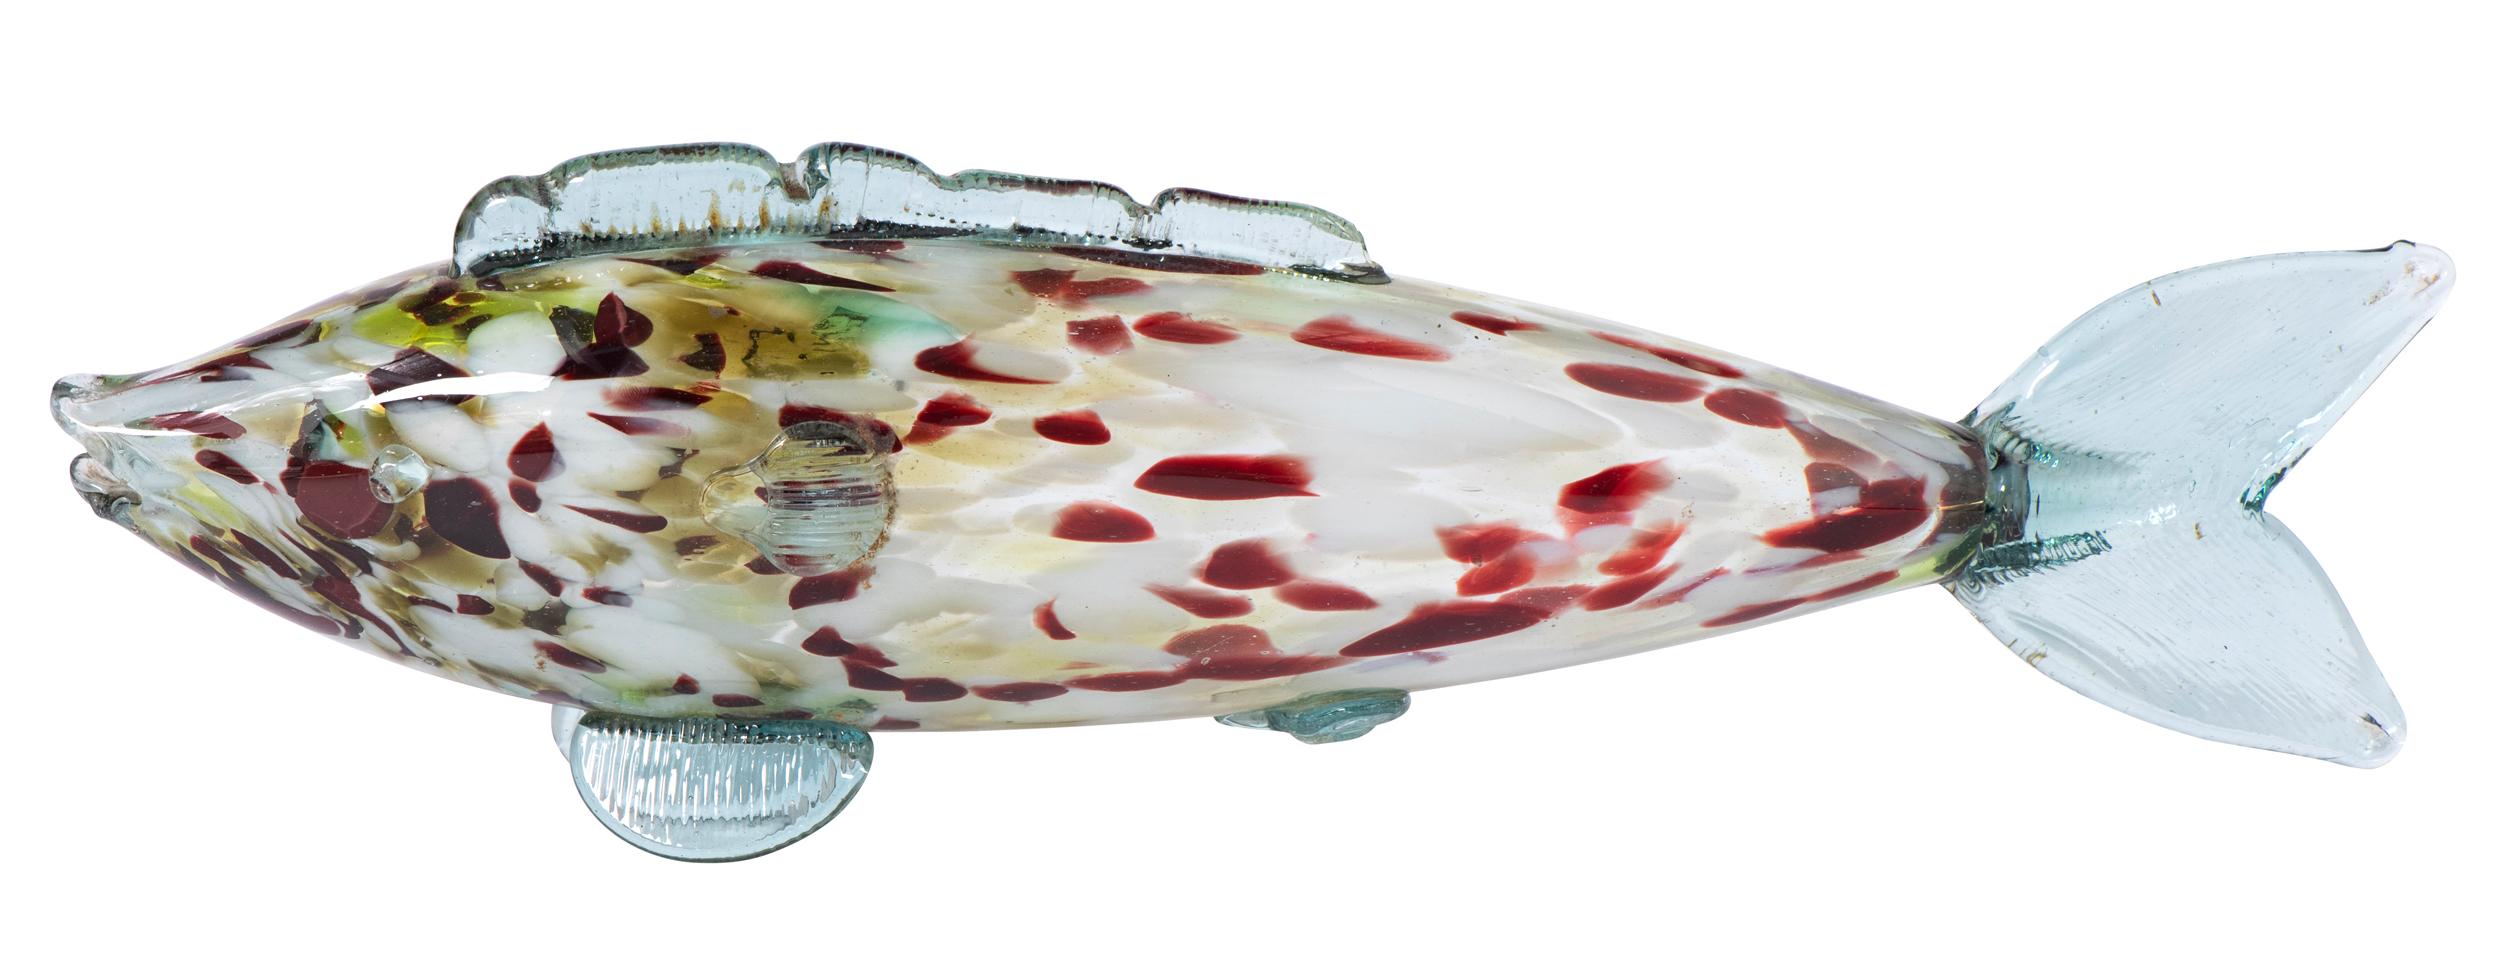 A large Murano glass fish.
Clear, white, blue and red glass.
Beautifully blown with moulded fin detail.
Italy circa 1970
Measures: 47 cm wide x 10 cm deep x 15 cm high.